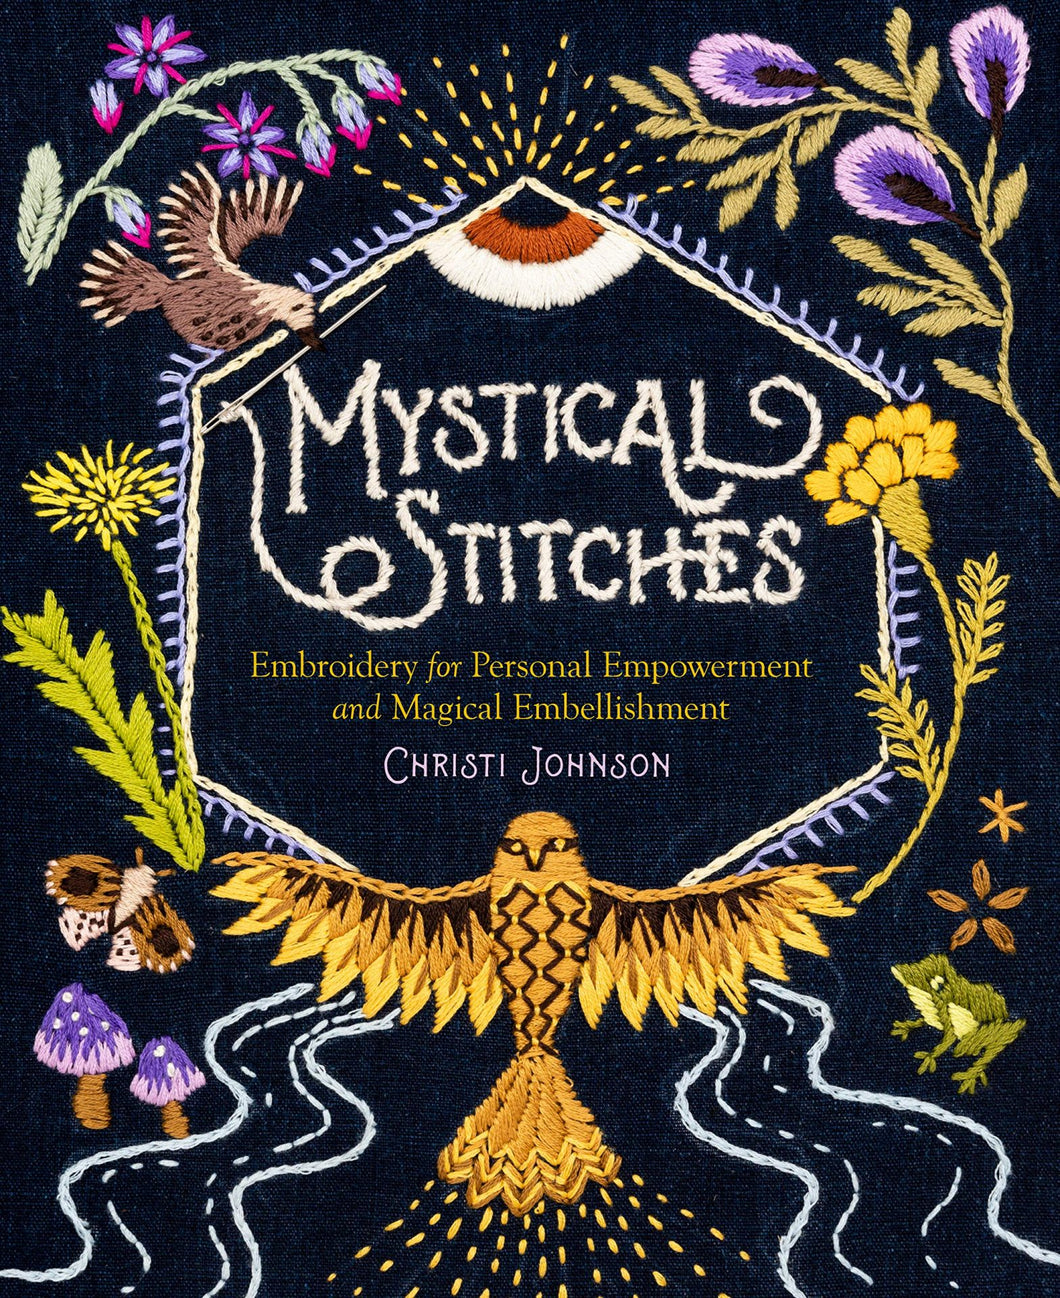 Mystical Stitches ~ Embroidery for Personal Empowerment and Magical Embellishment, By Christi Johnson